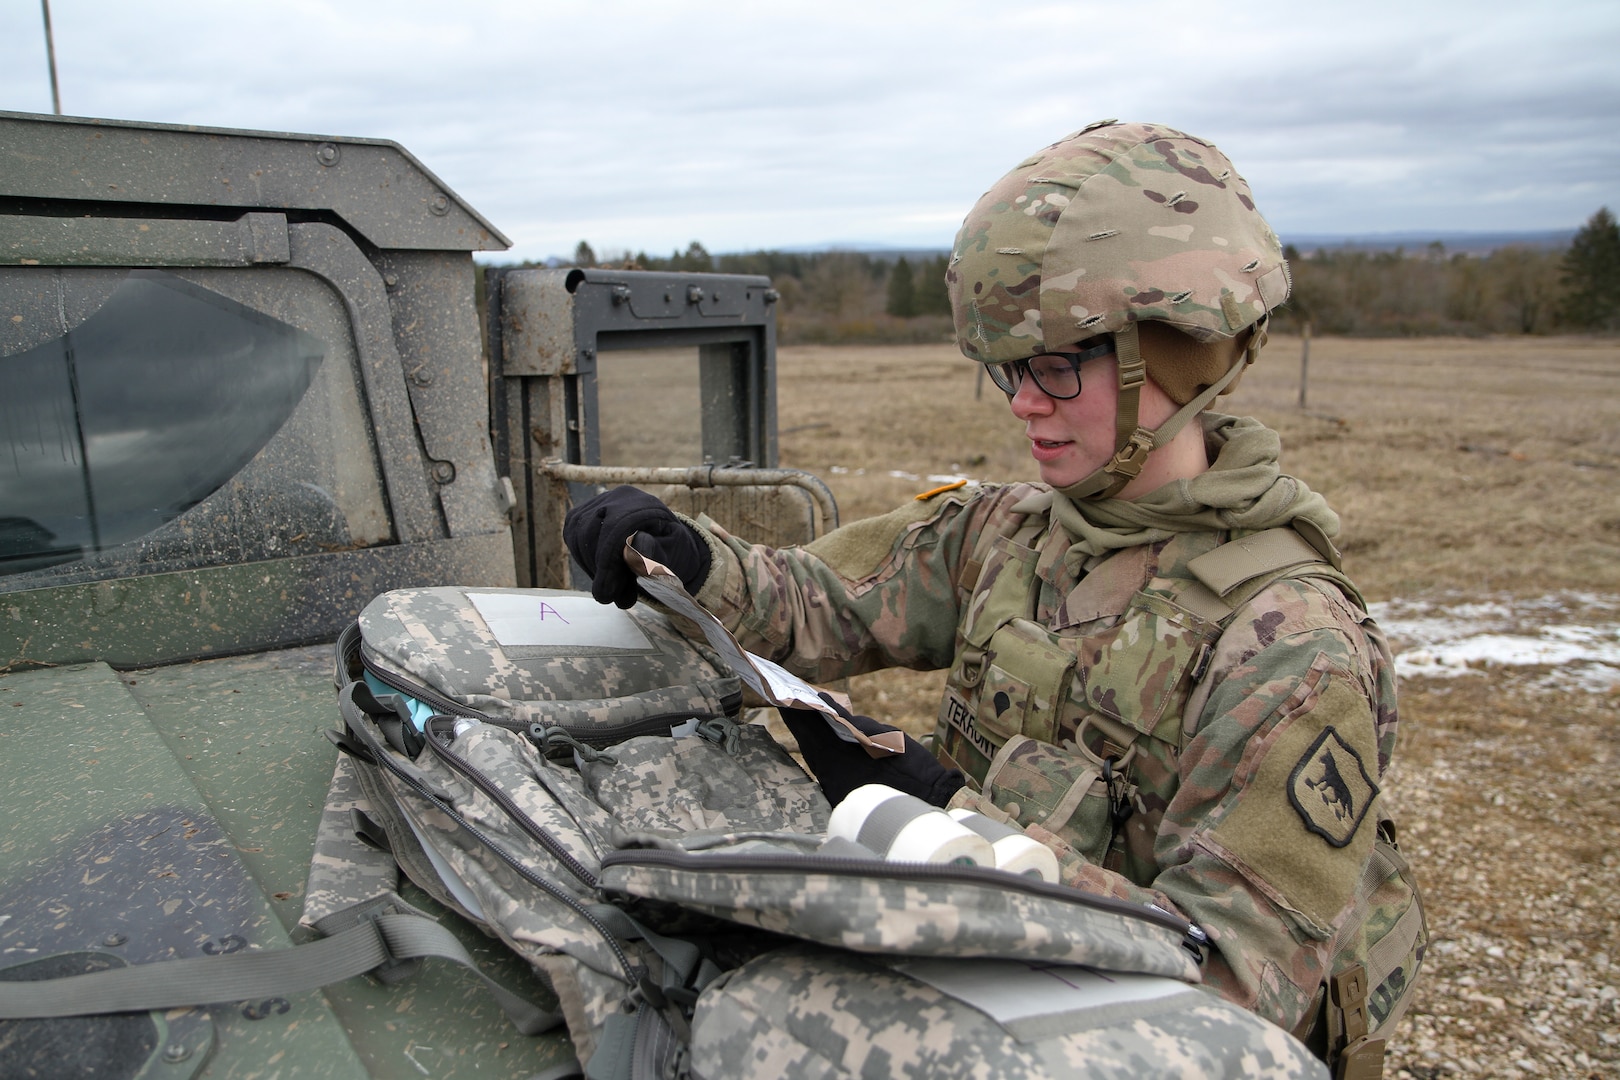 Spc. Leannah TeKrony, combat medic specialist, 1-147th Field Artillery Battalion, performs preventive maintenance checks and services on her medical bag during Operation Atlantic Resolve in Grafenwohr, Germany, Jan. 30, 2020. It is important to develop interoperability with allies and partners to maintain trust and reaffirm the U.S.’s commitment to NATO.